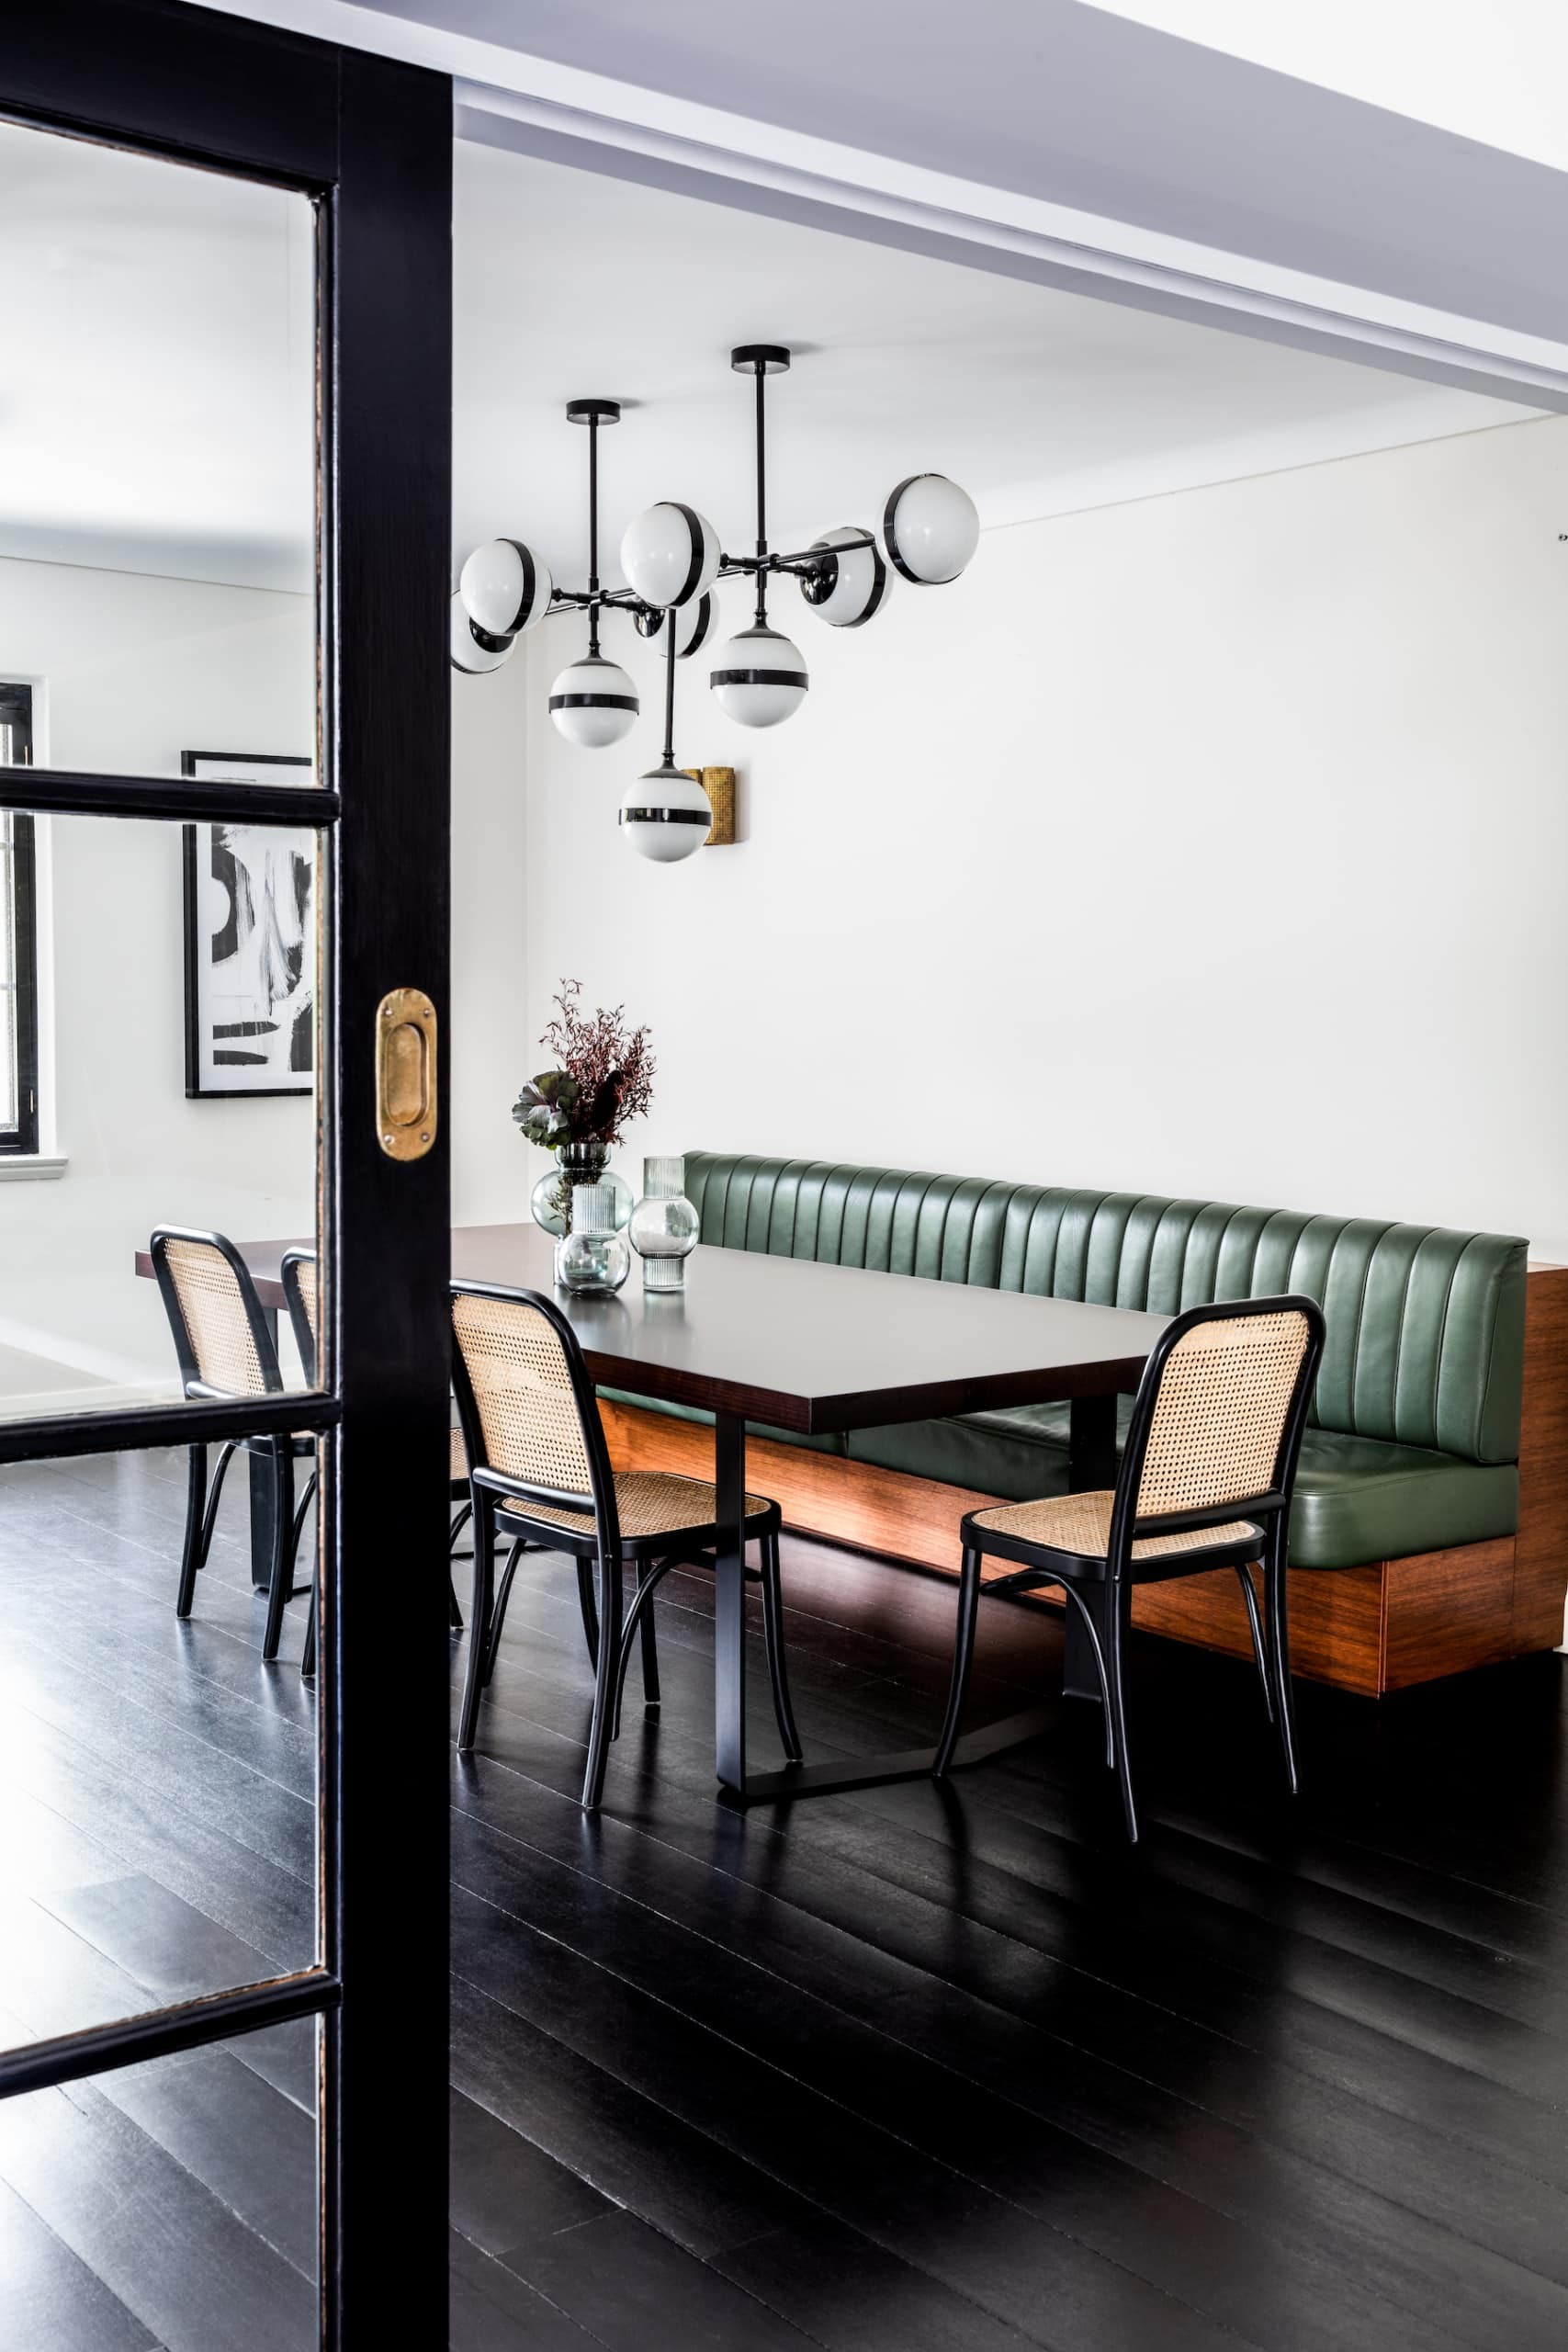 oz design abby dining chairs in chic dining room with leather banquette seating